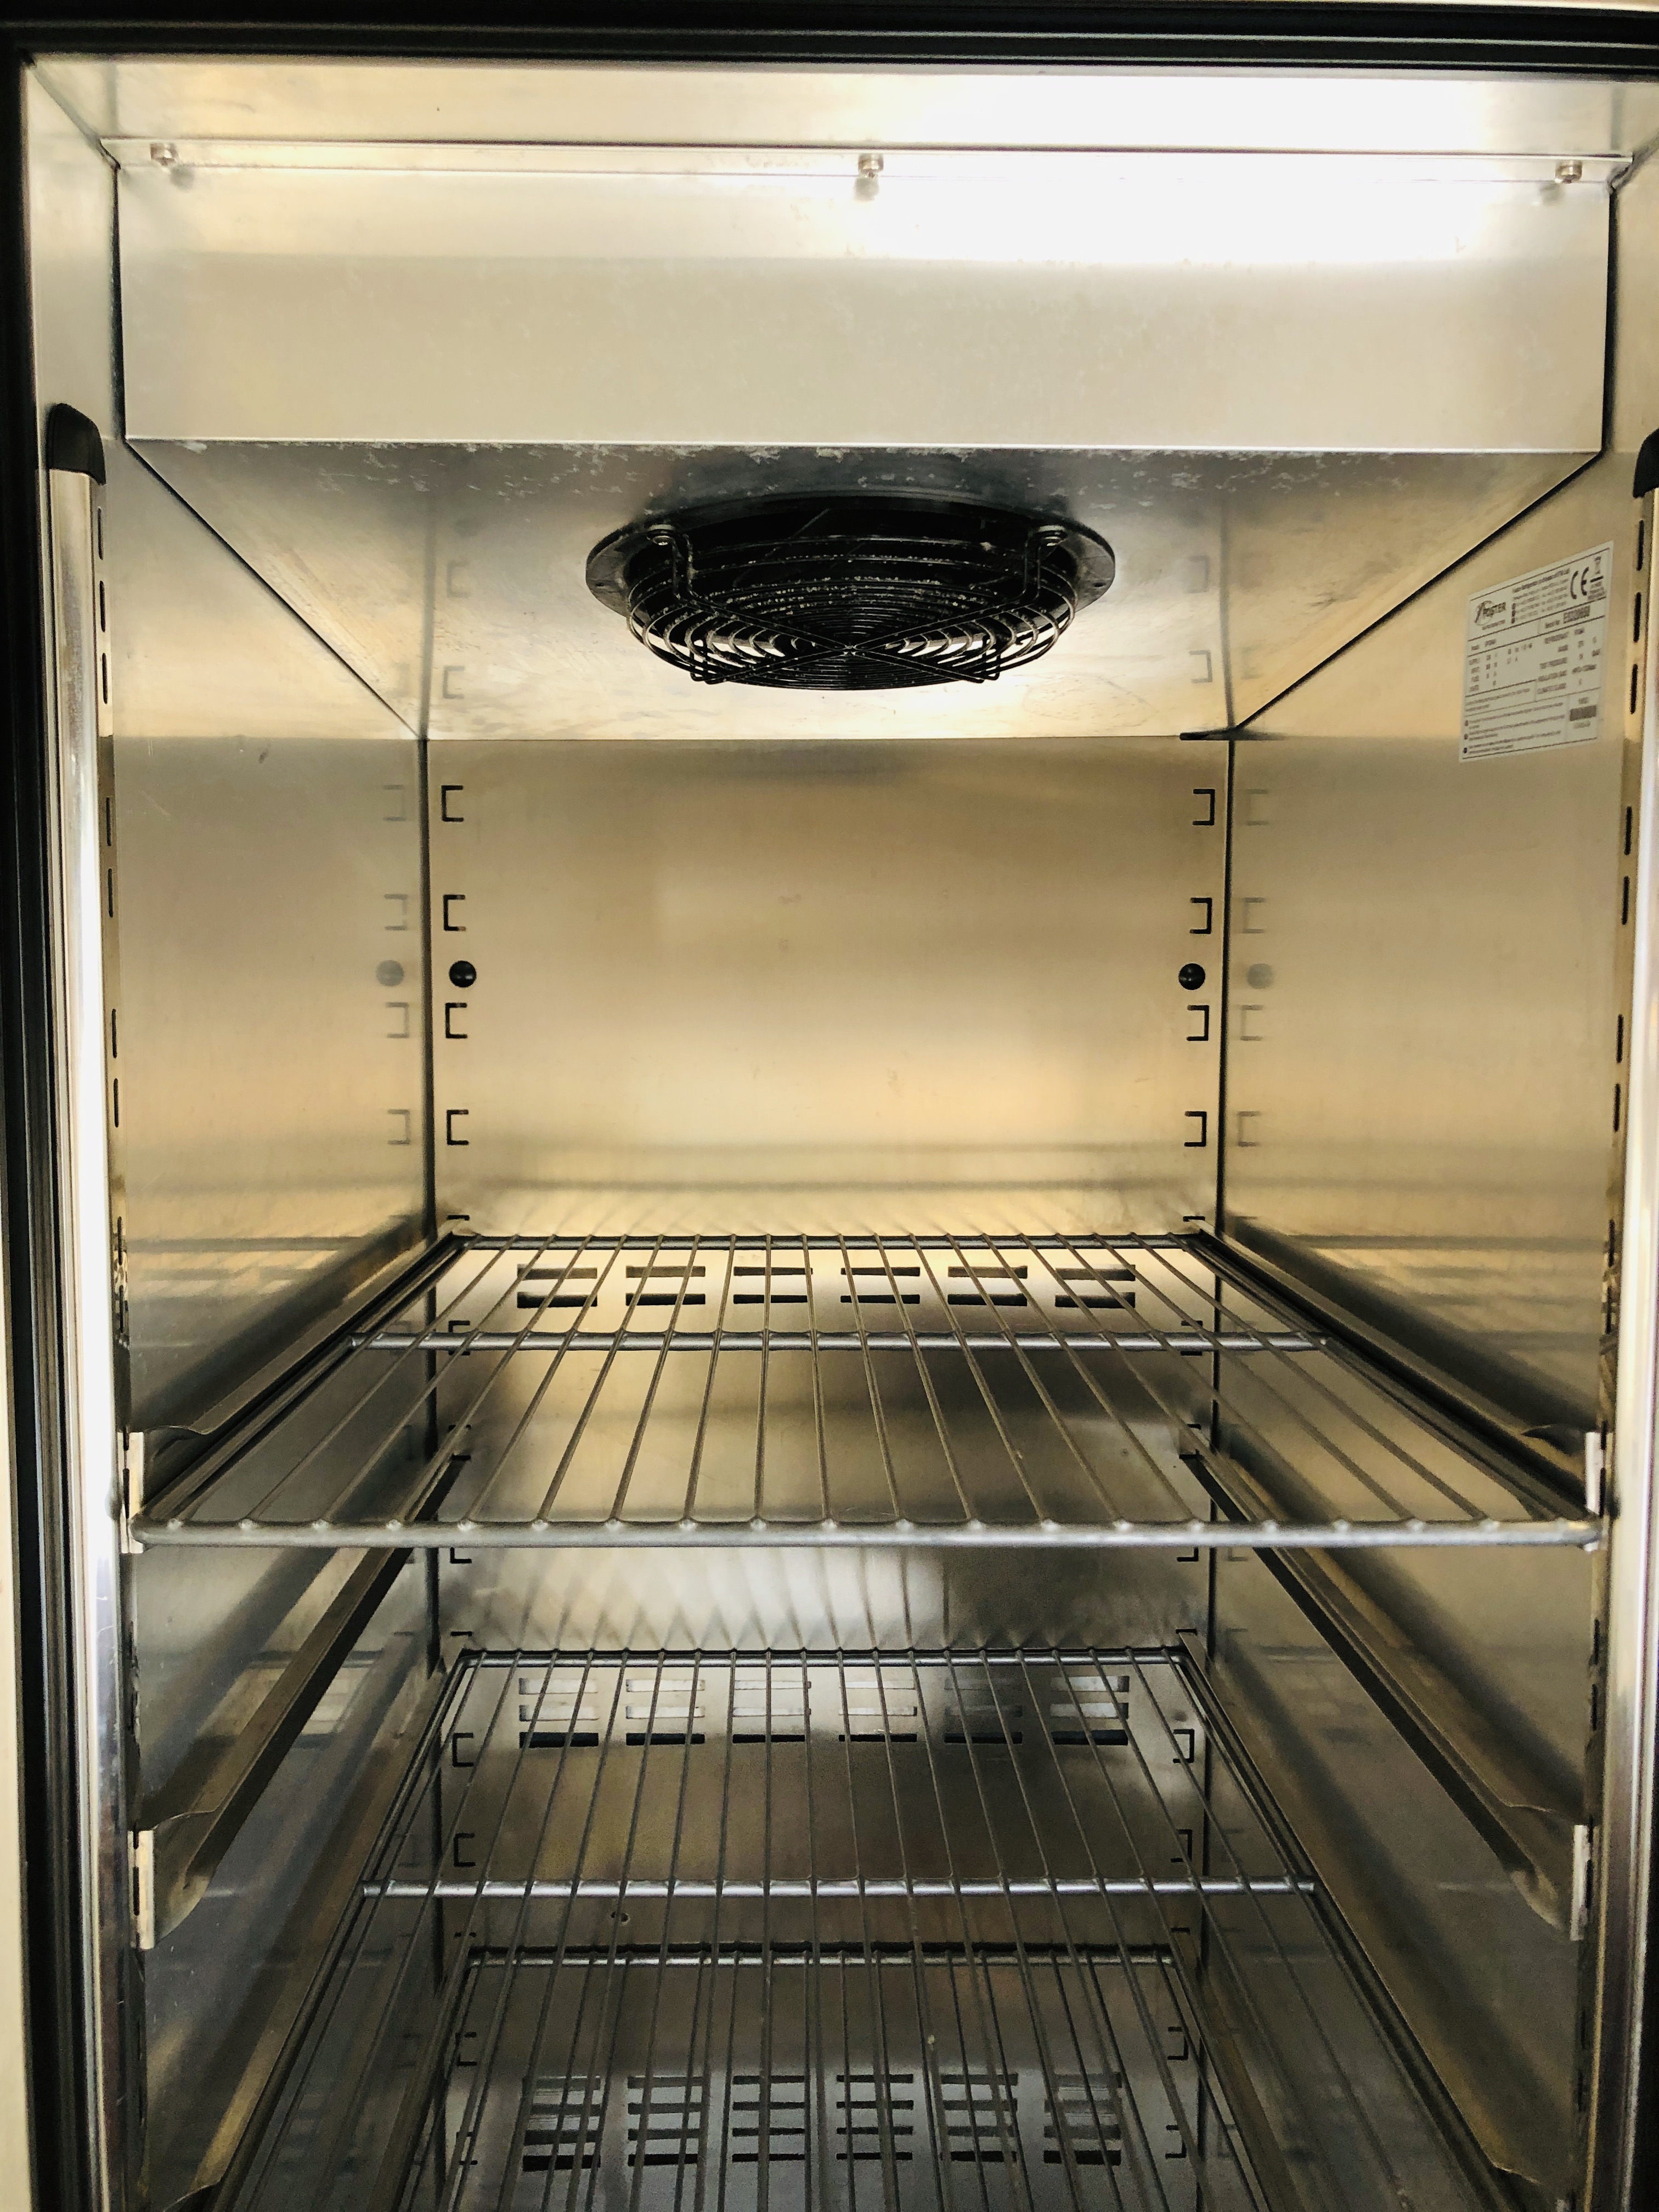 FOSTER G2 ECO PRO STAINLESS STEEL COMMERCIAL REFRIGERATOR MODEL EP700HU - SOLD AS SEEN - Image 8 of 9